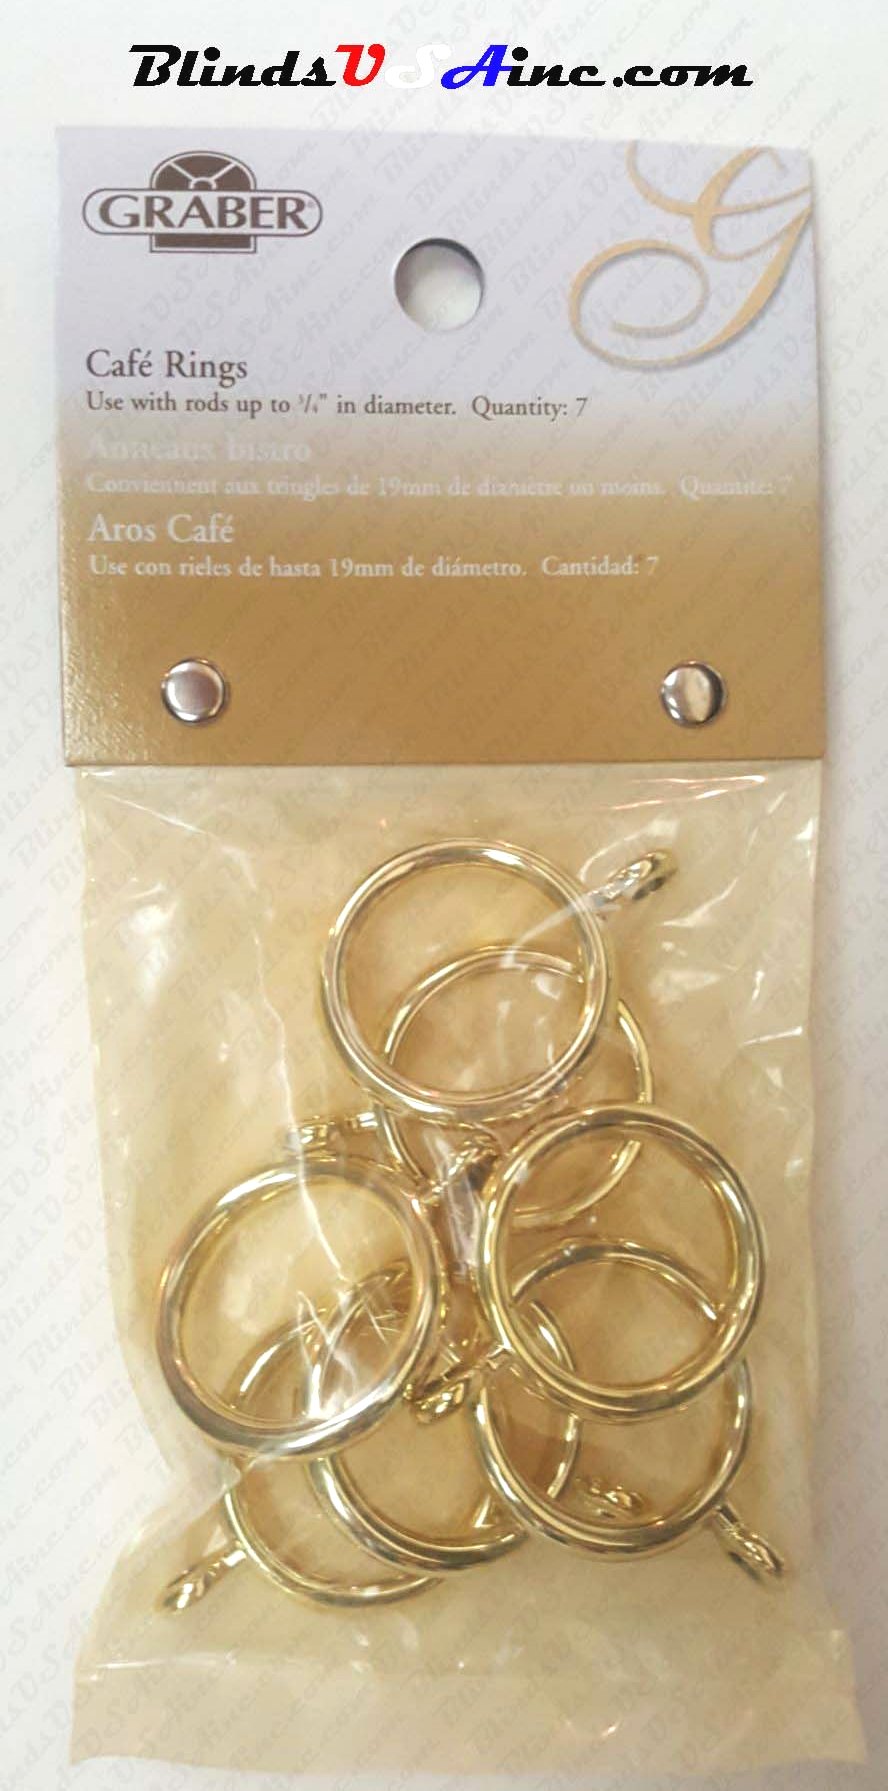 Graber 3/4" Cafe' Rings with Eyelet, finish brass, pack of 7, Part # 5-840-8